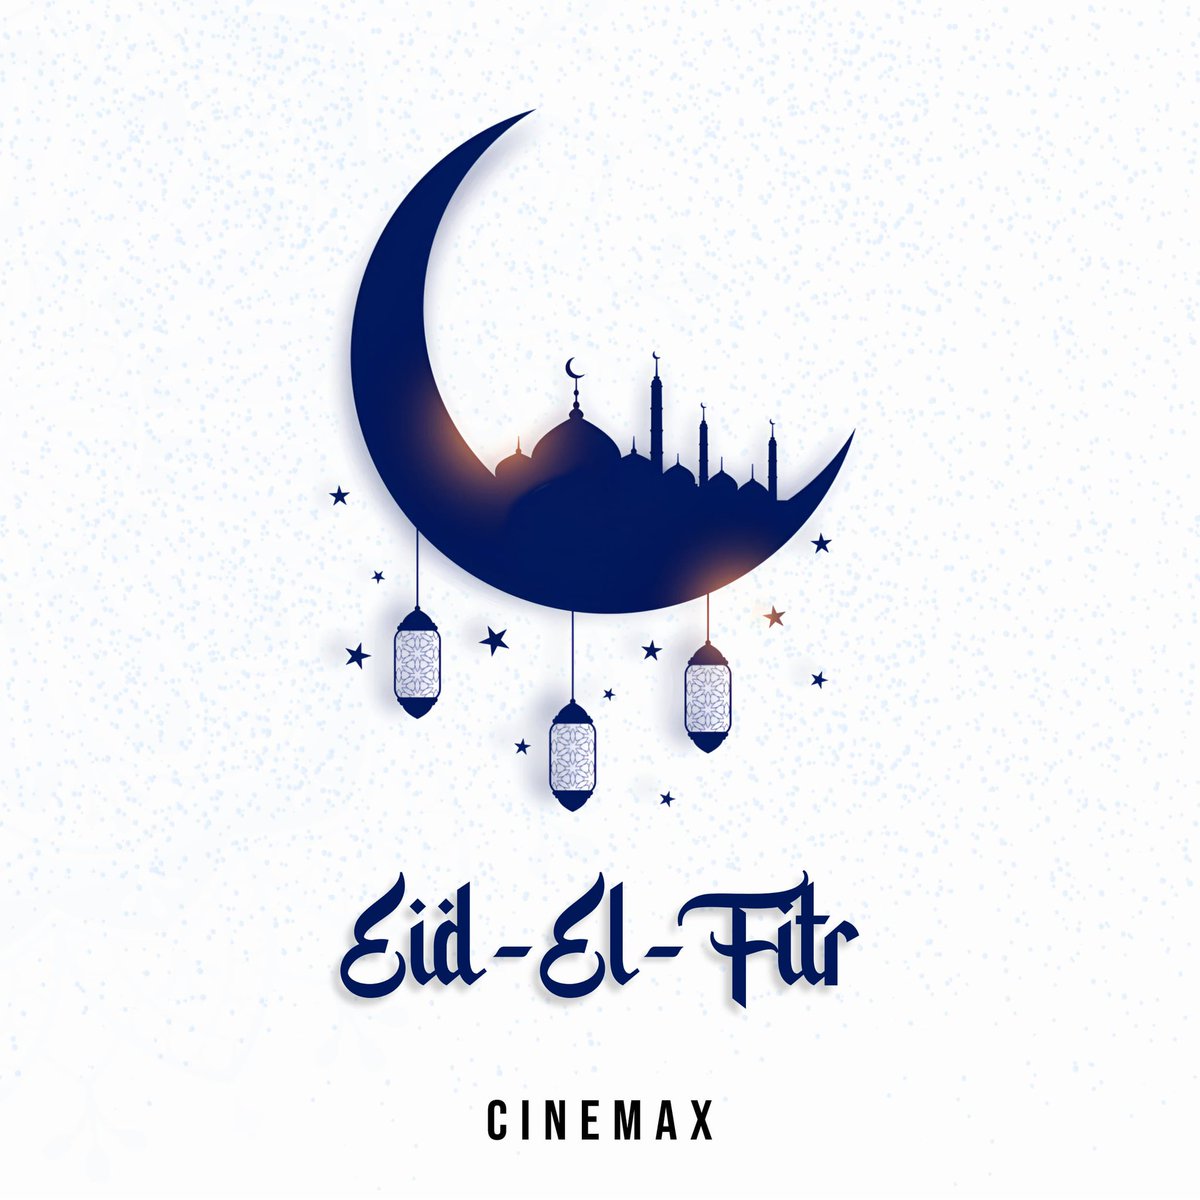 HAPPY EID El-FITRI GREETINGS ✨ May the divine blessings of Allah bring you hope, faith and joy on this Eid and forever 🙏🏻 . . #cinemaxng #cinemaxdistribution